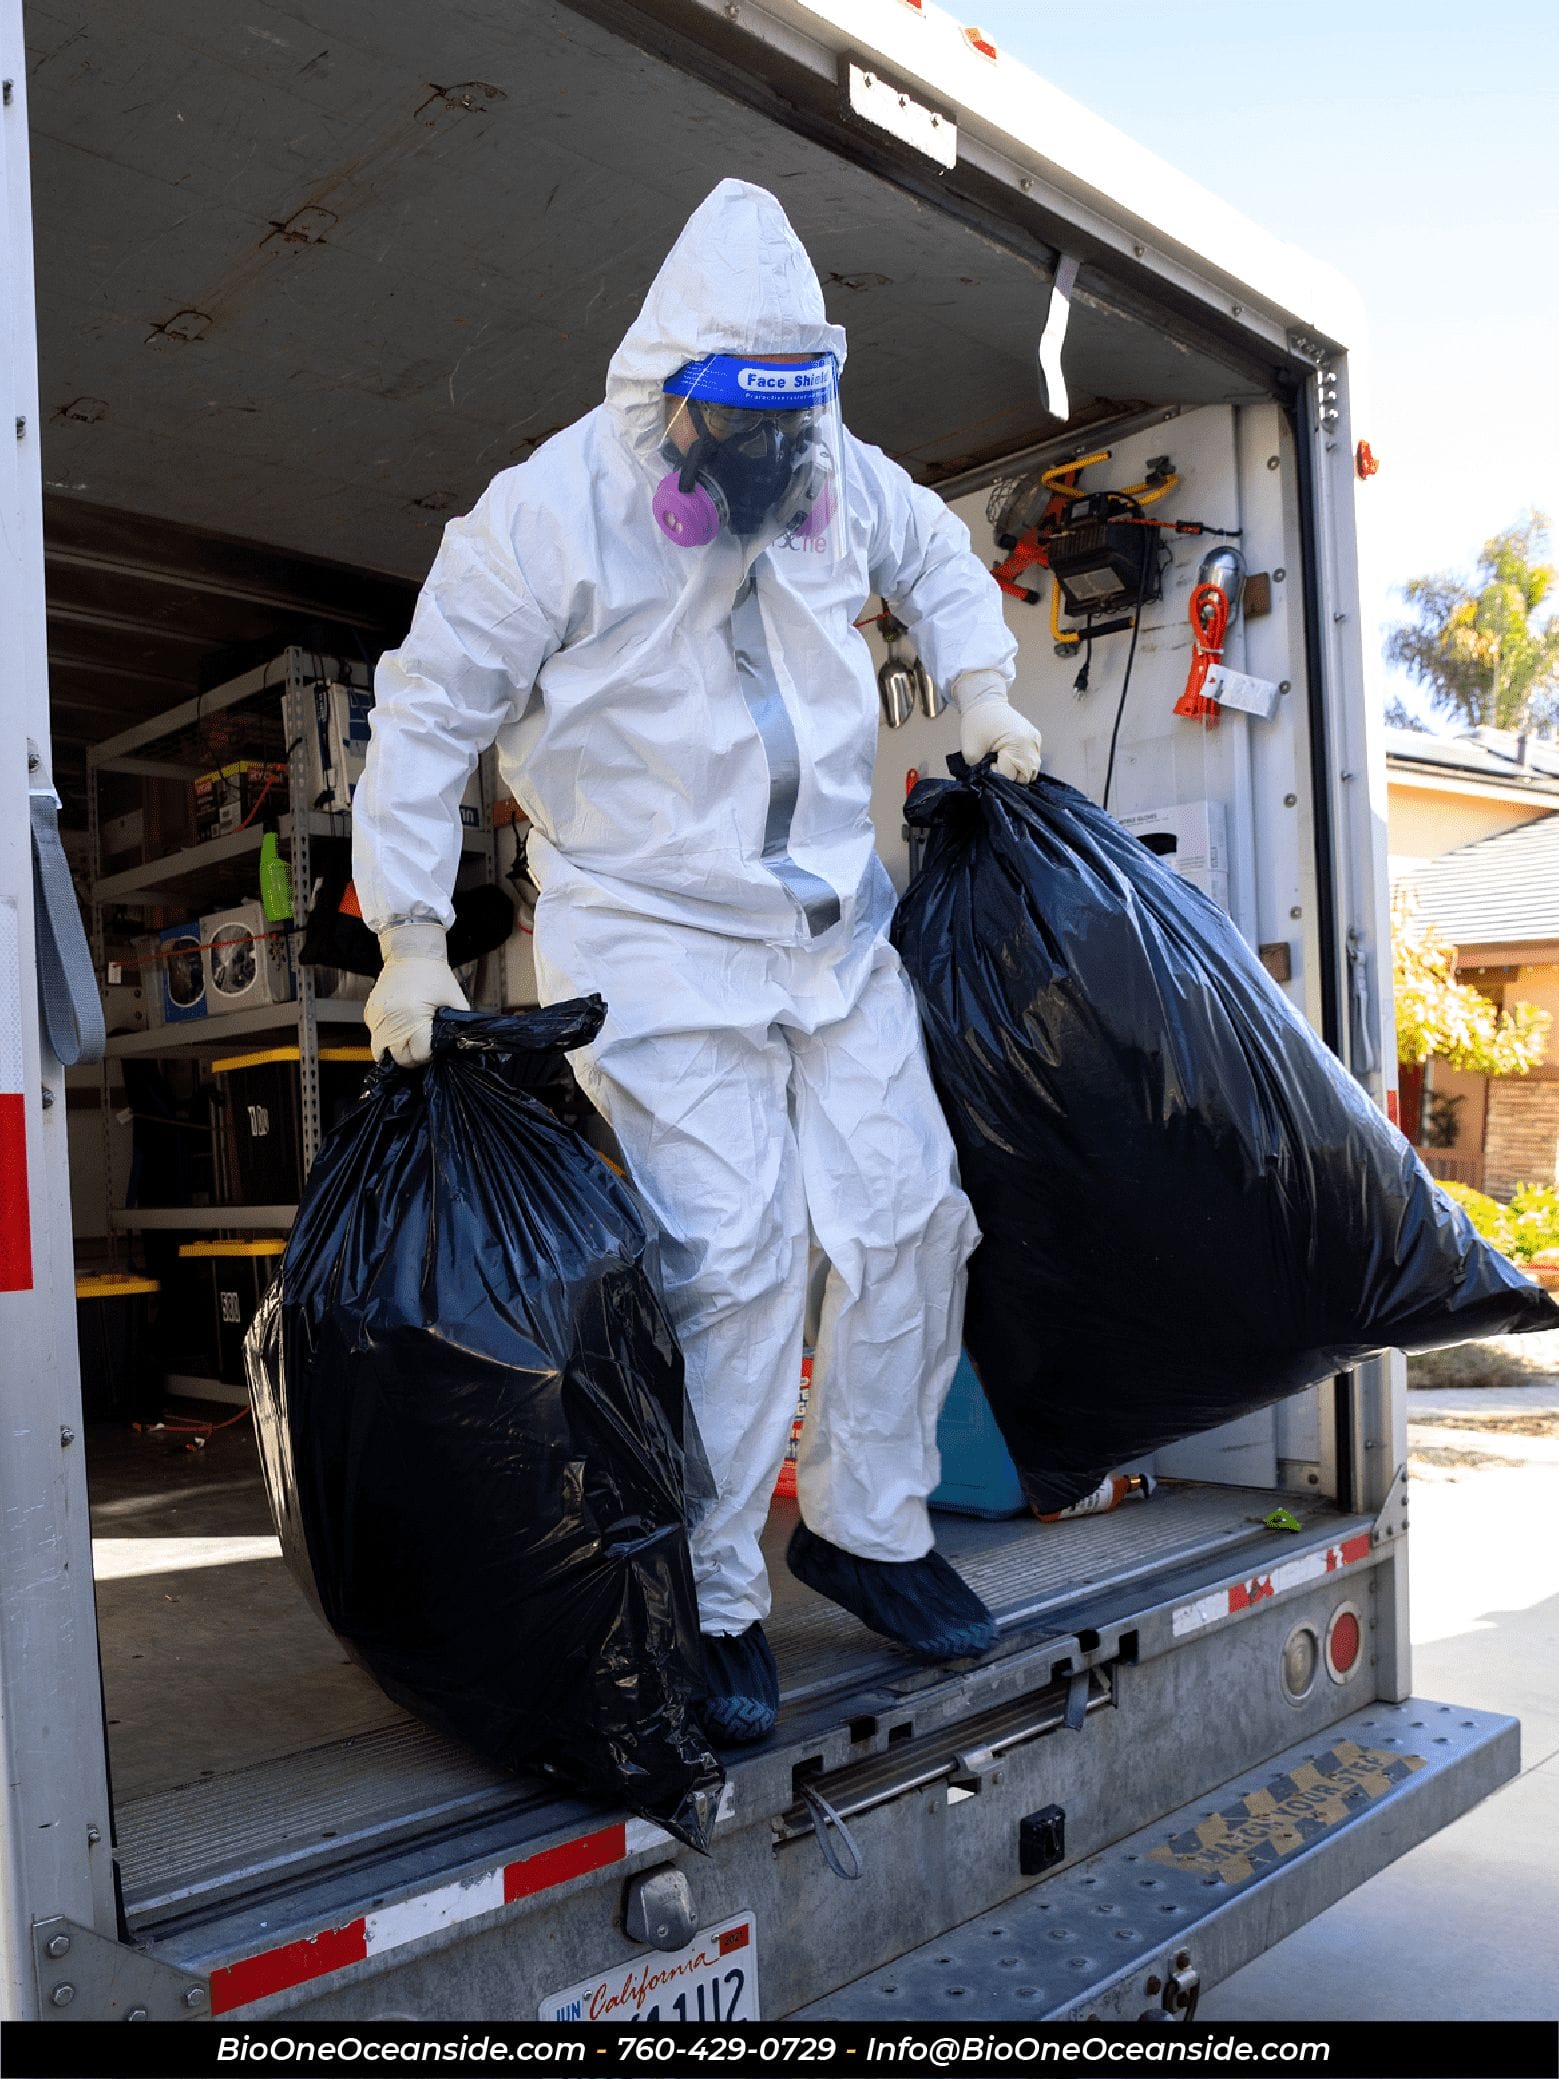 Image shows Bio-One technician carrying out two bags of trash and waste.